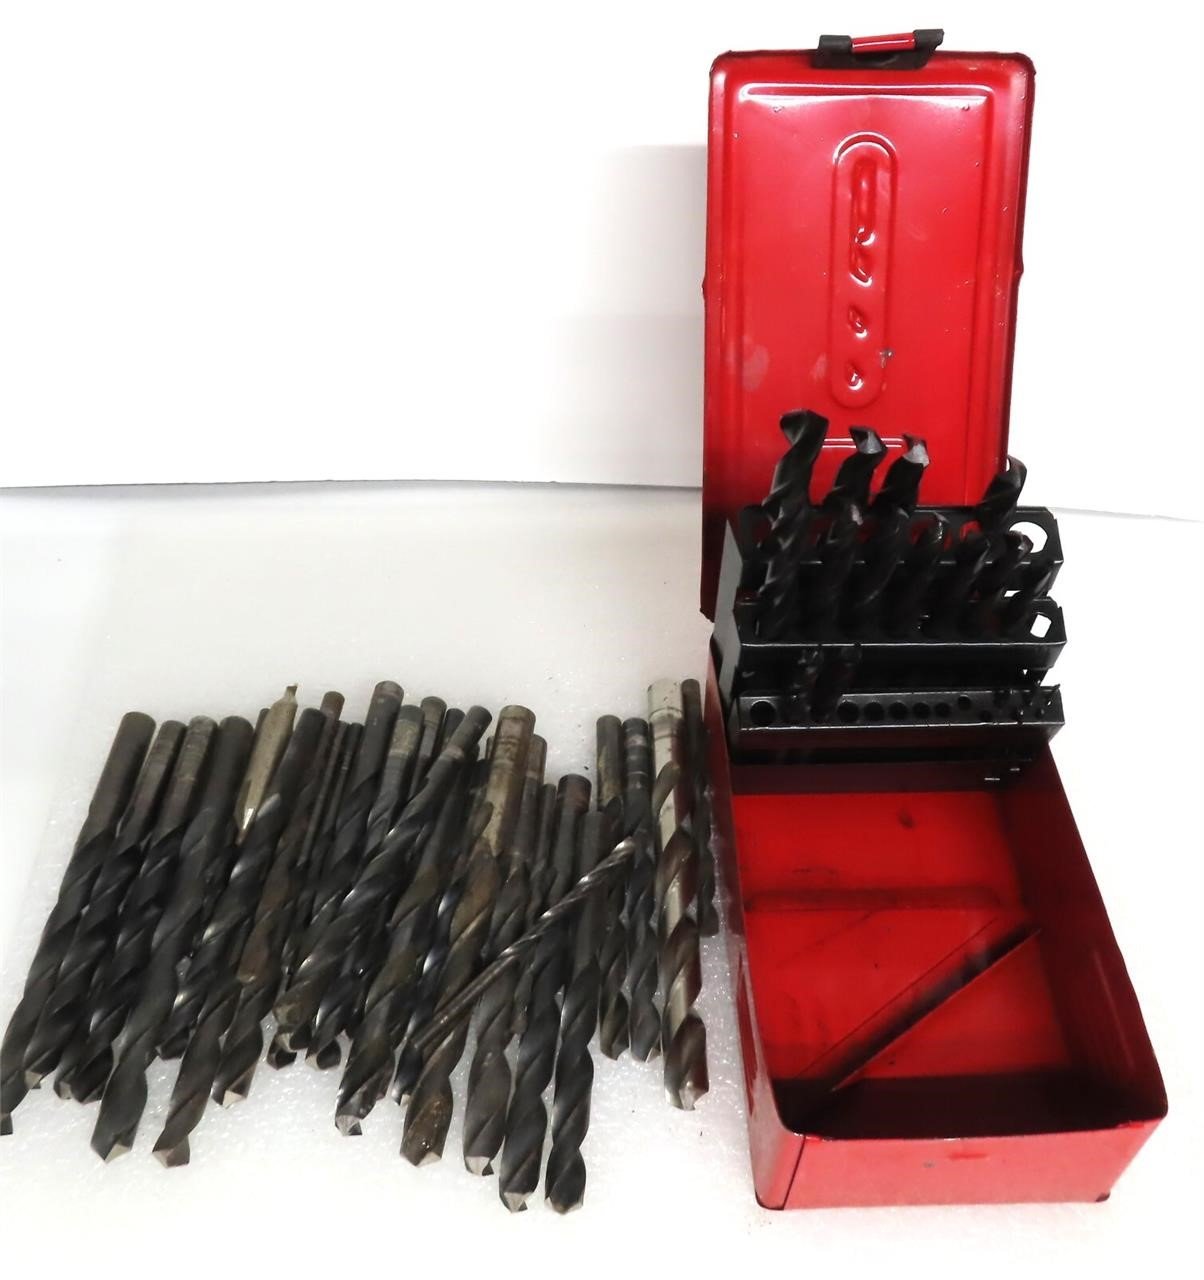 Drill Bits, We Will Ship These